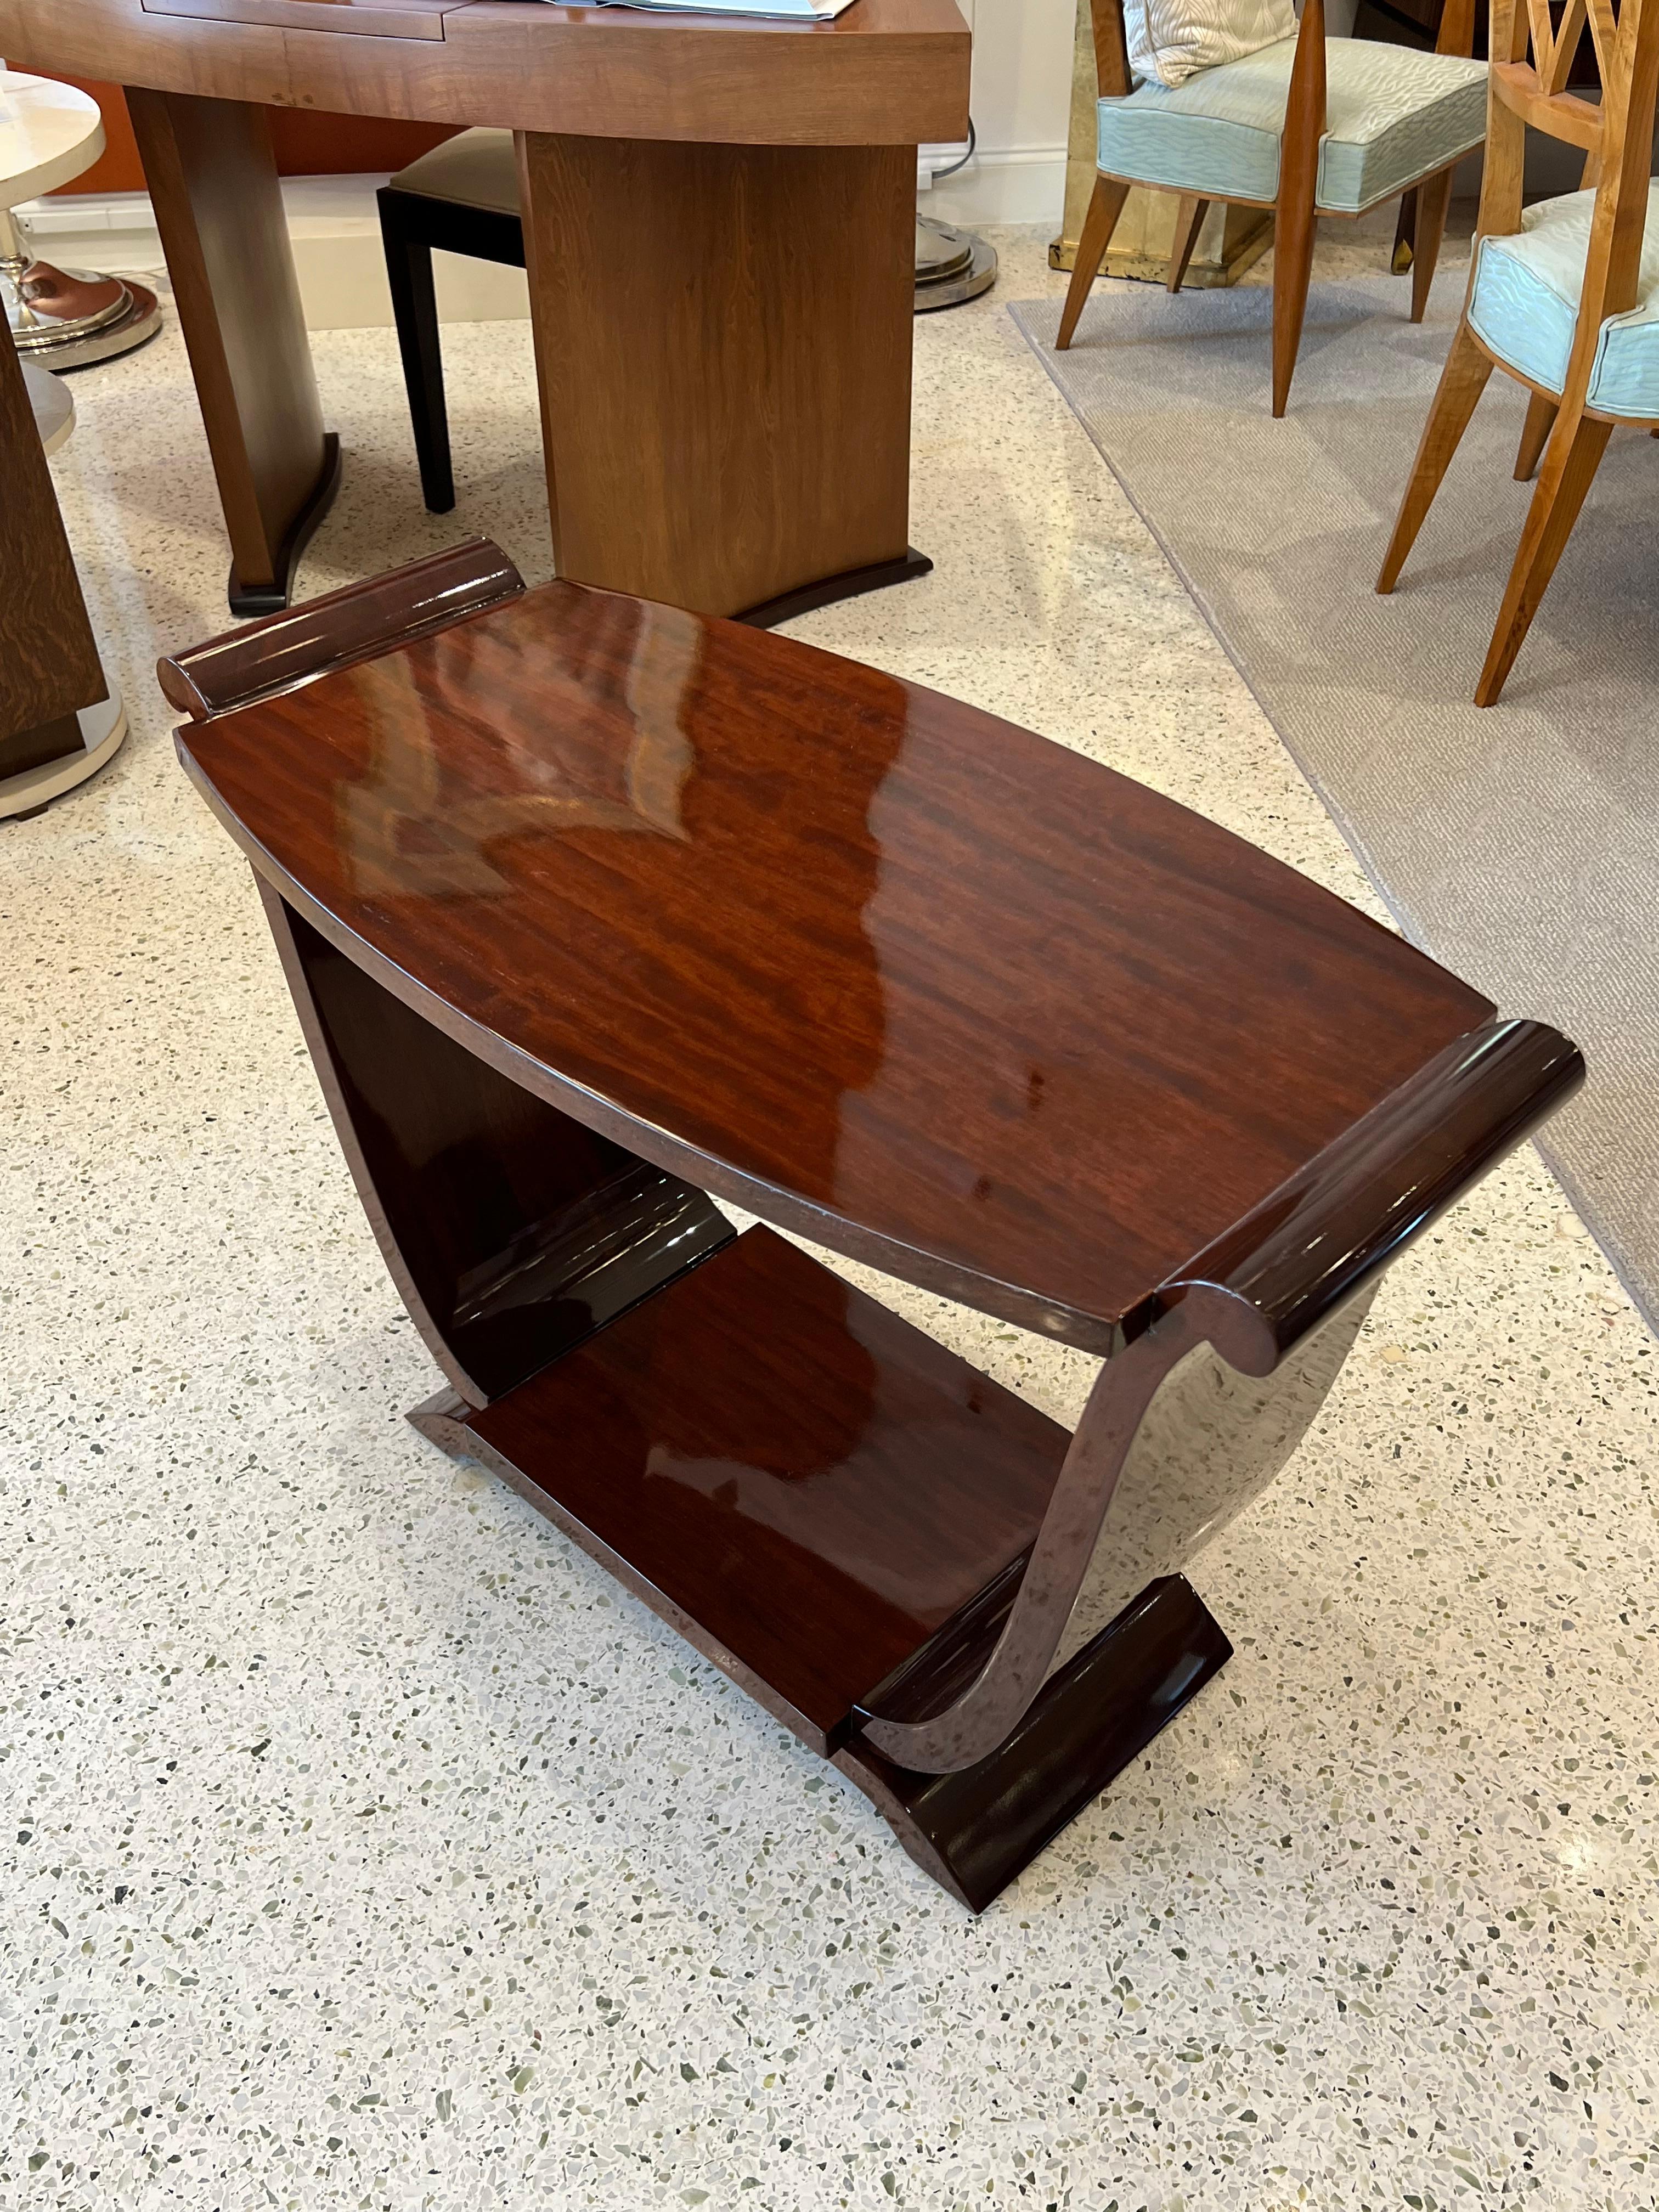 Art Deco Mahogany table with stylized u-shaped design.
Made in France.
CIrca: 1930